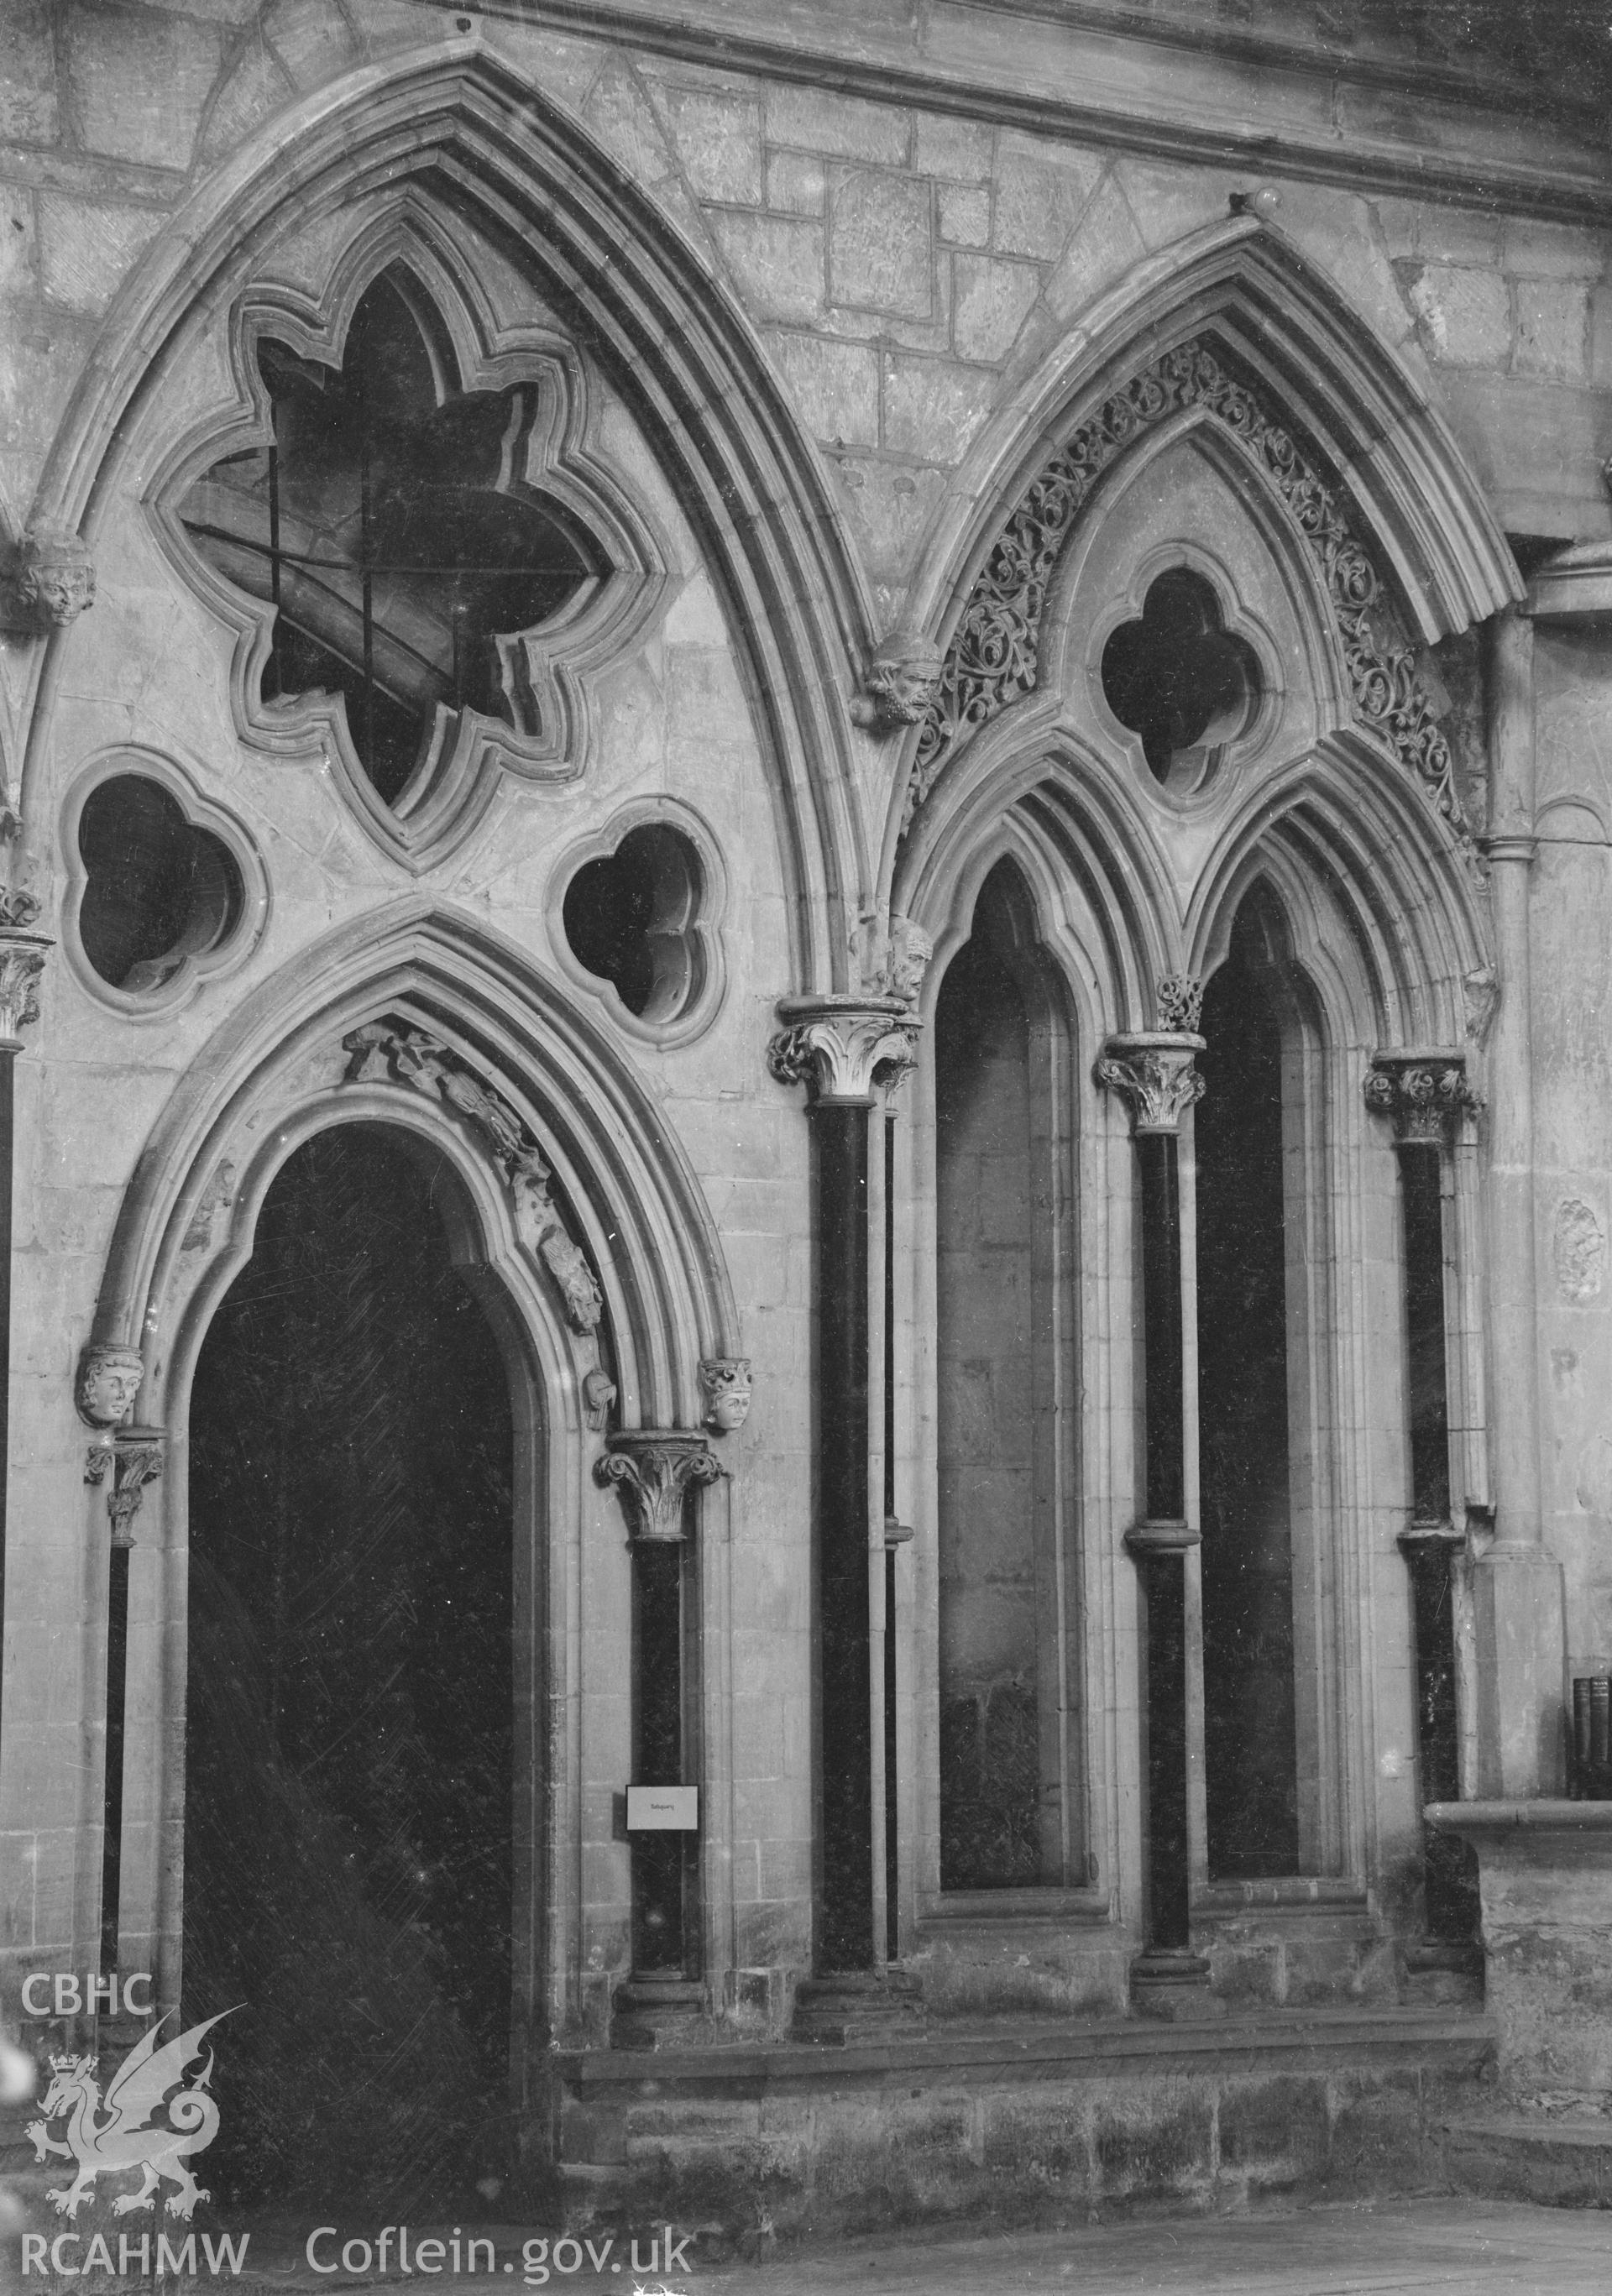 Digital copy of a black and white acetate negative showing arches in St. David's Cathedral, taken by E.W. Lovegrove, July 1936.